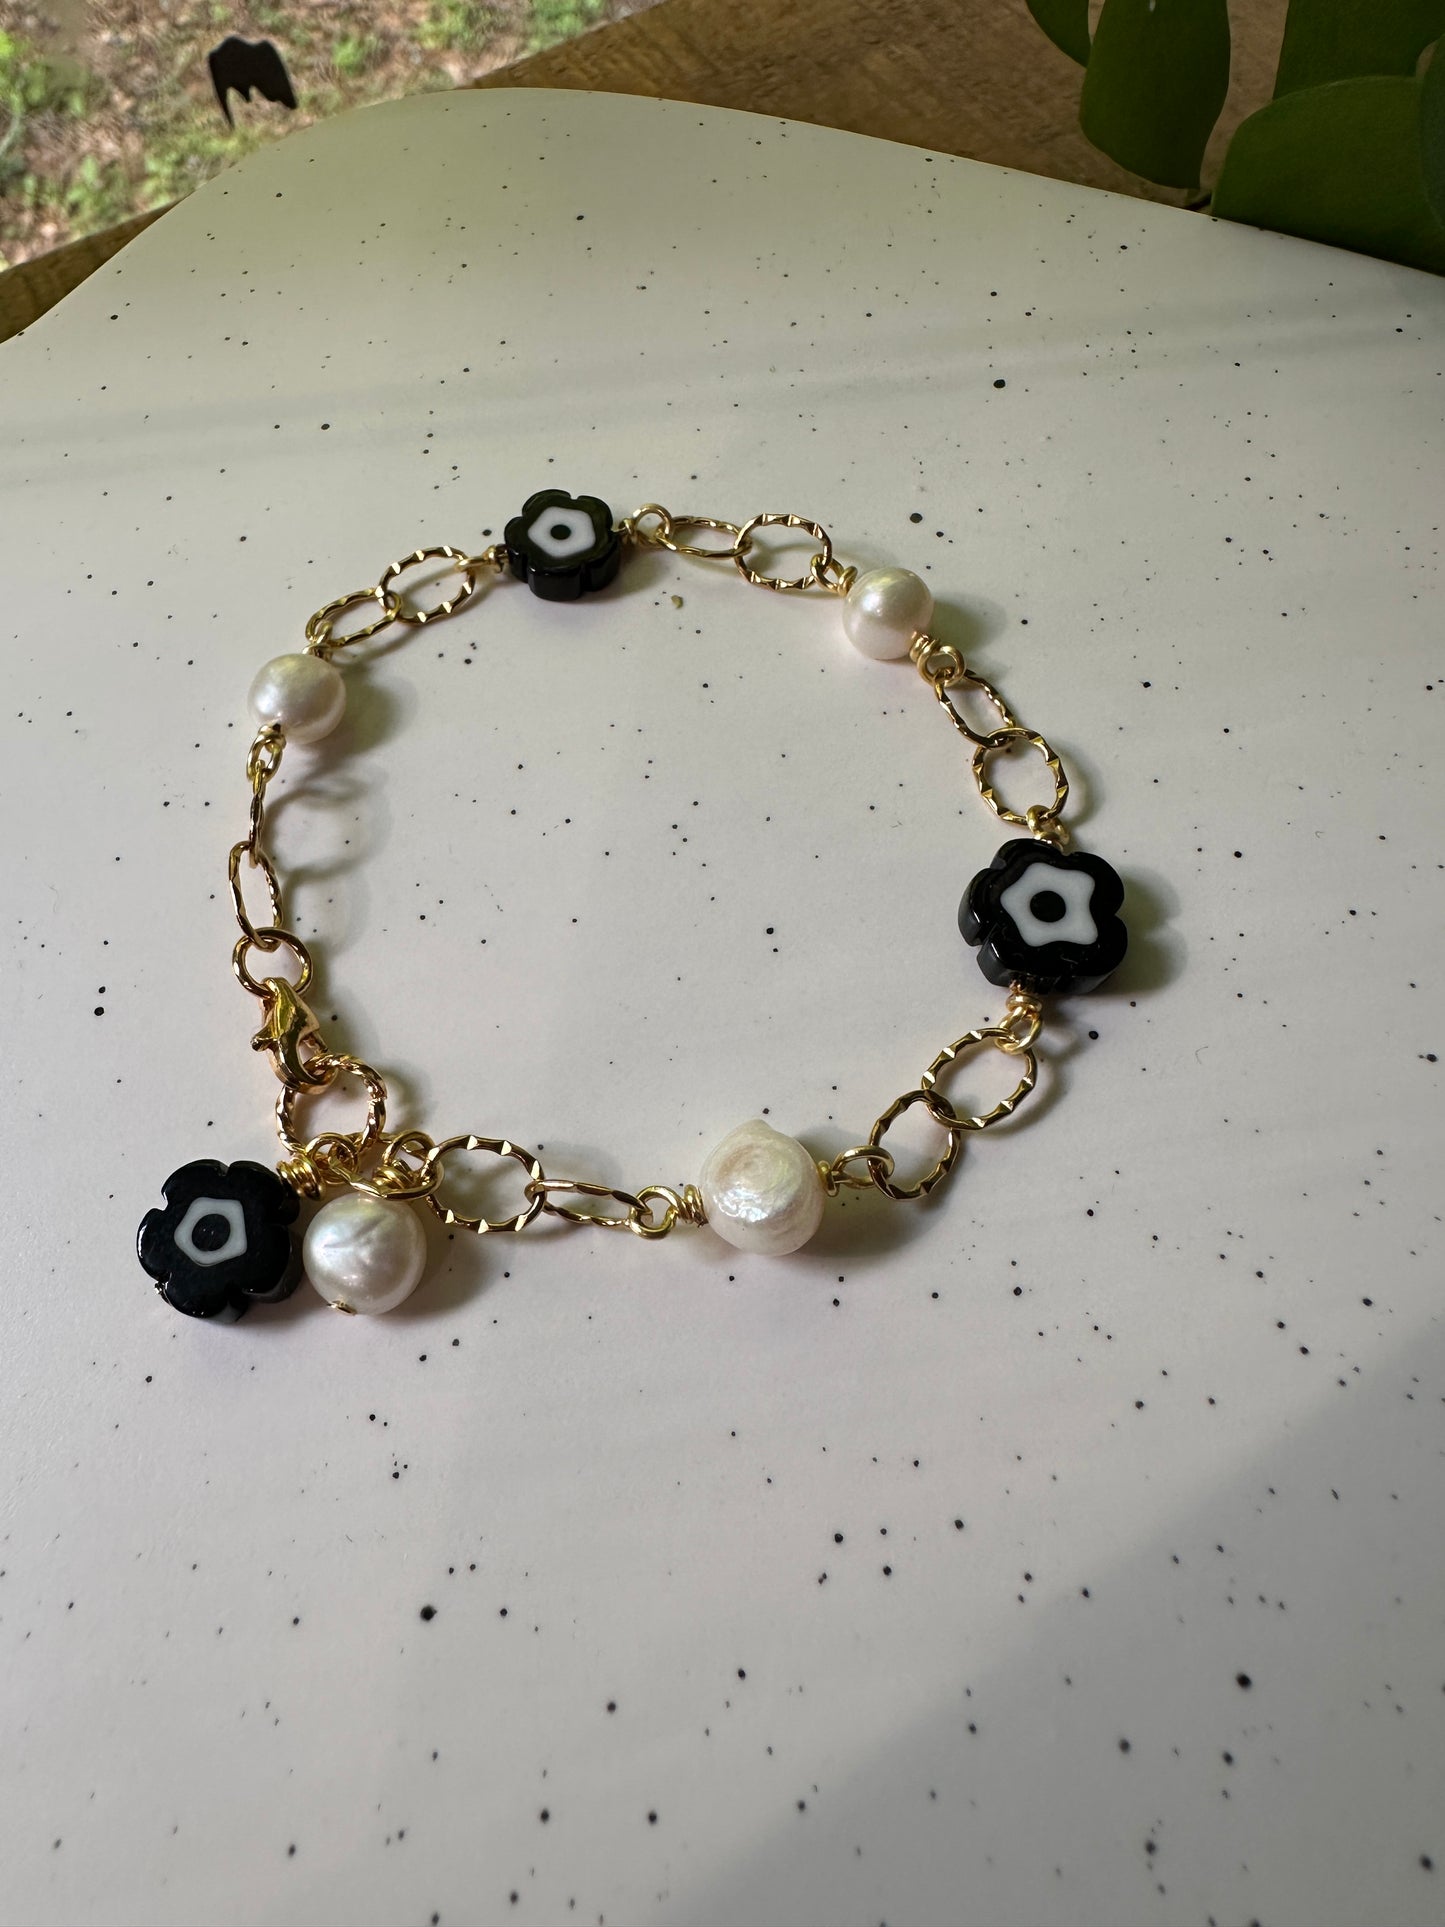 SS Black & White Daisy Chain Bracelet with Pearls